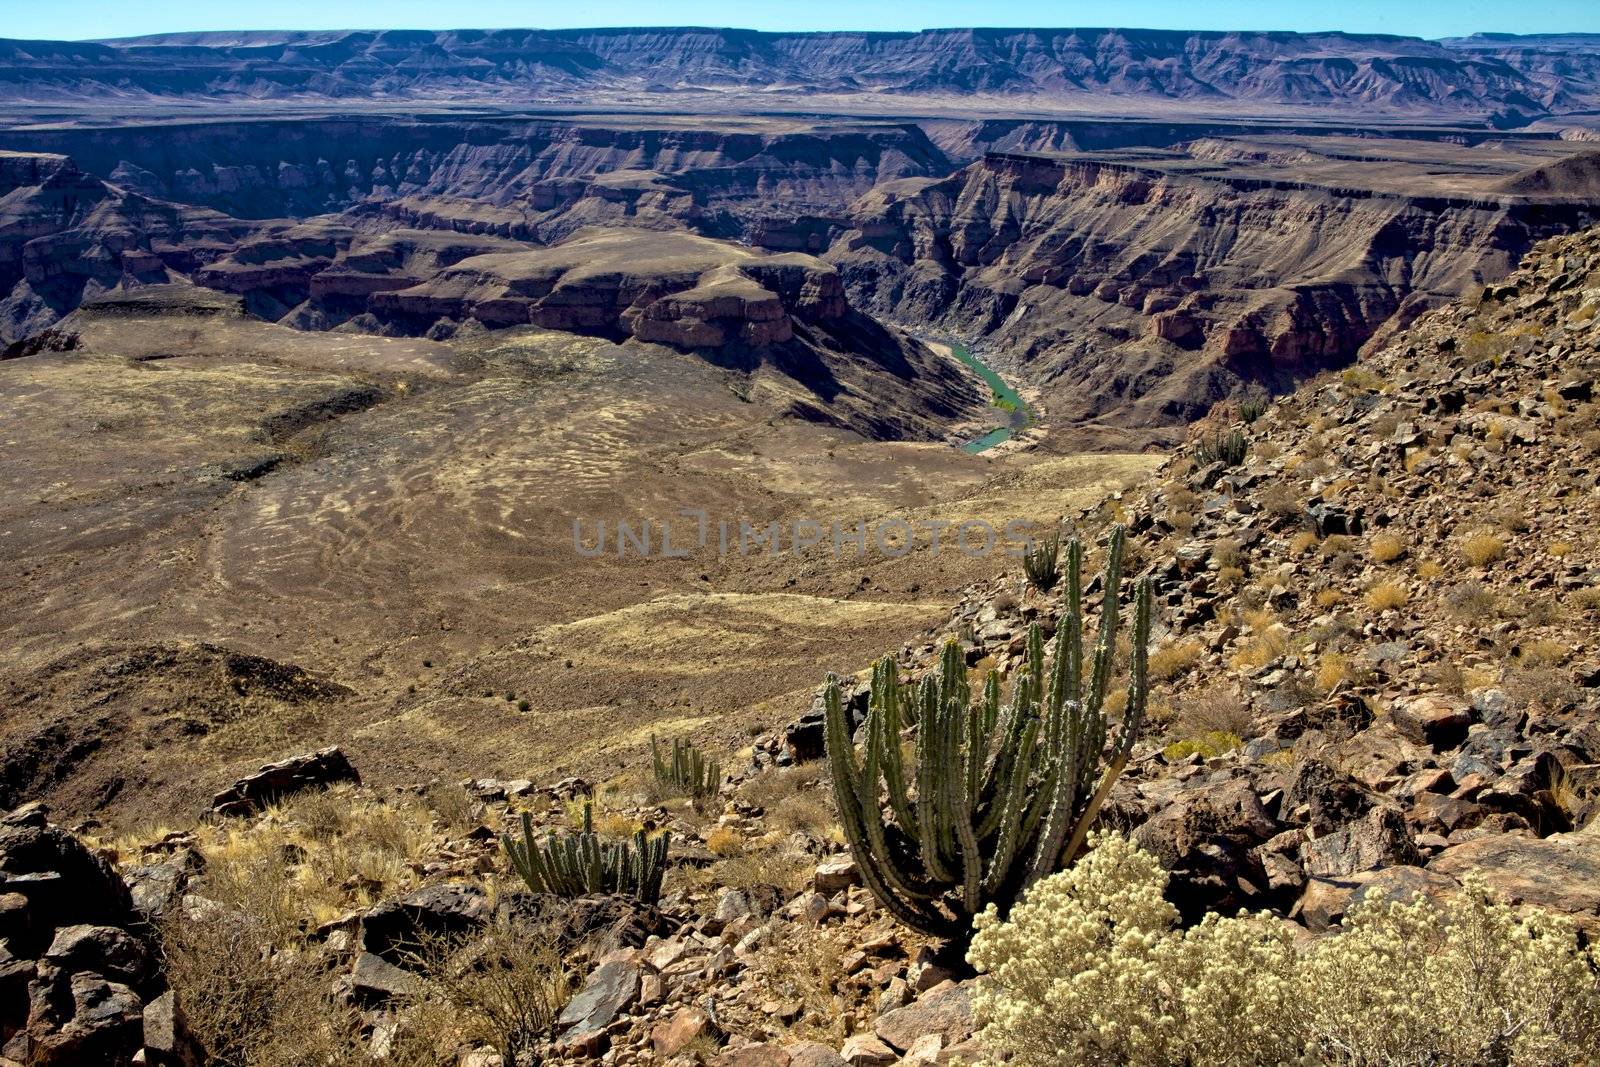 a cactus in front of the fish river canyon south namibia